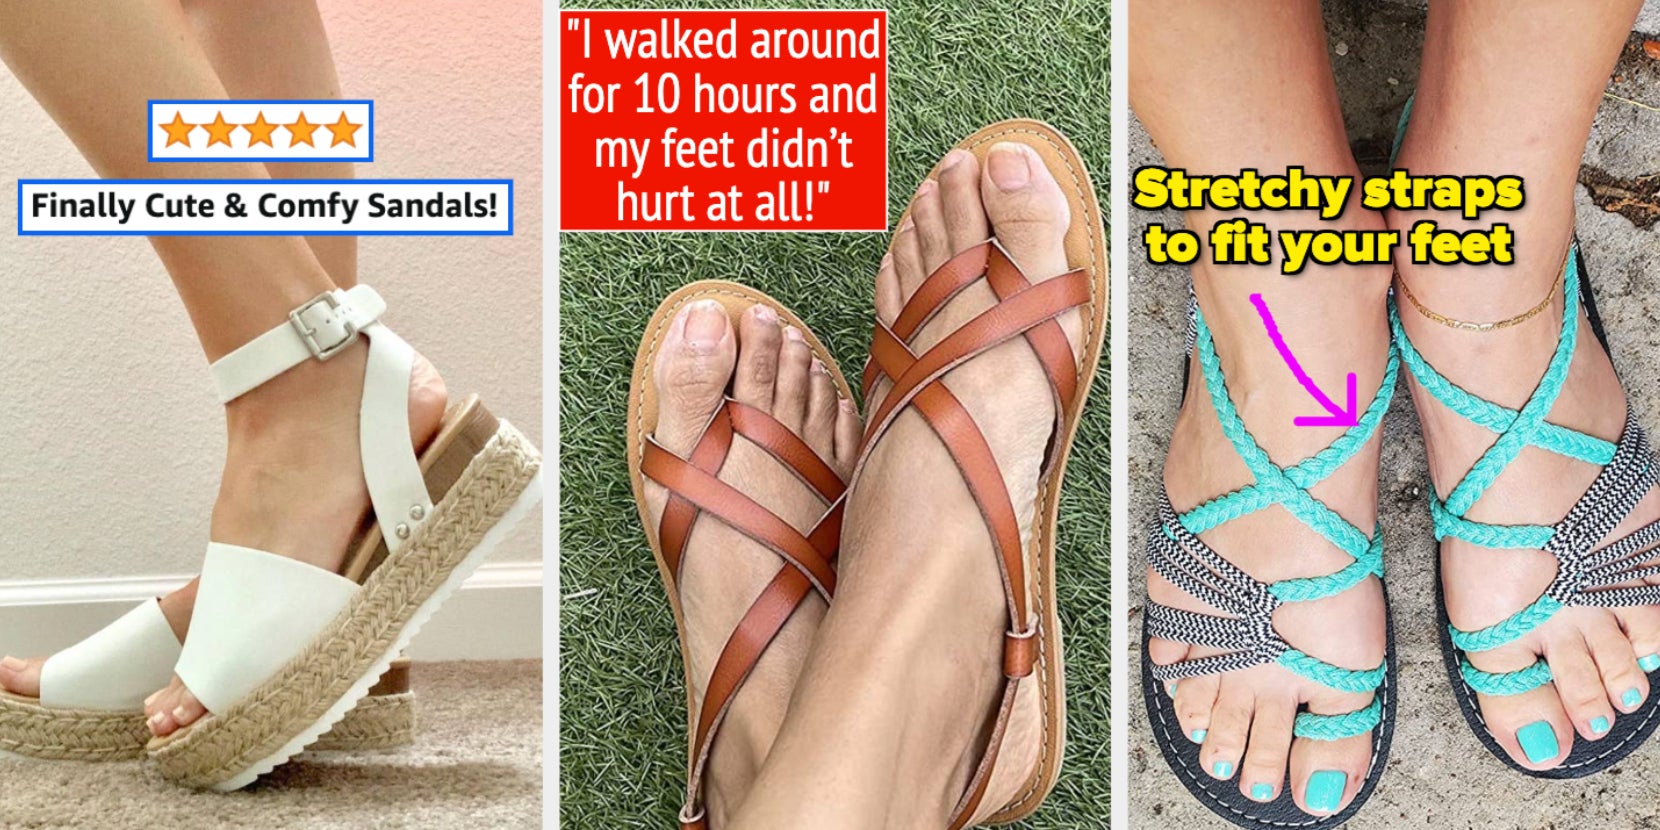 The Best Women's Sandals for Travel-Cute and Comfy Sandals for your Summer  Vacation - Casual Travelist